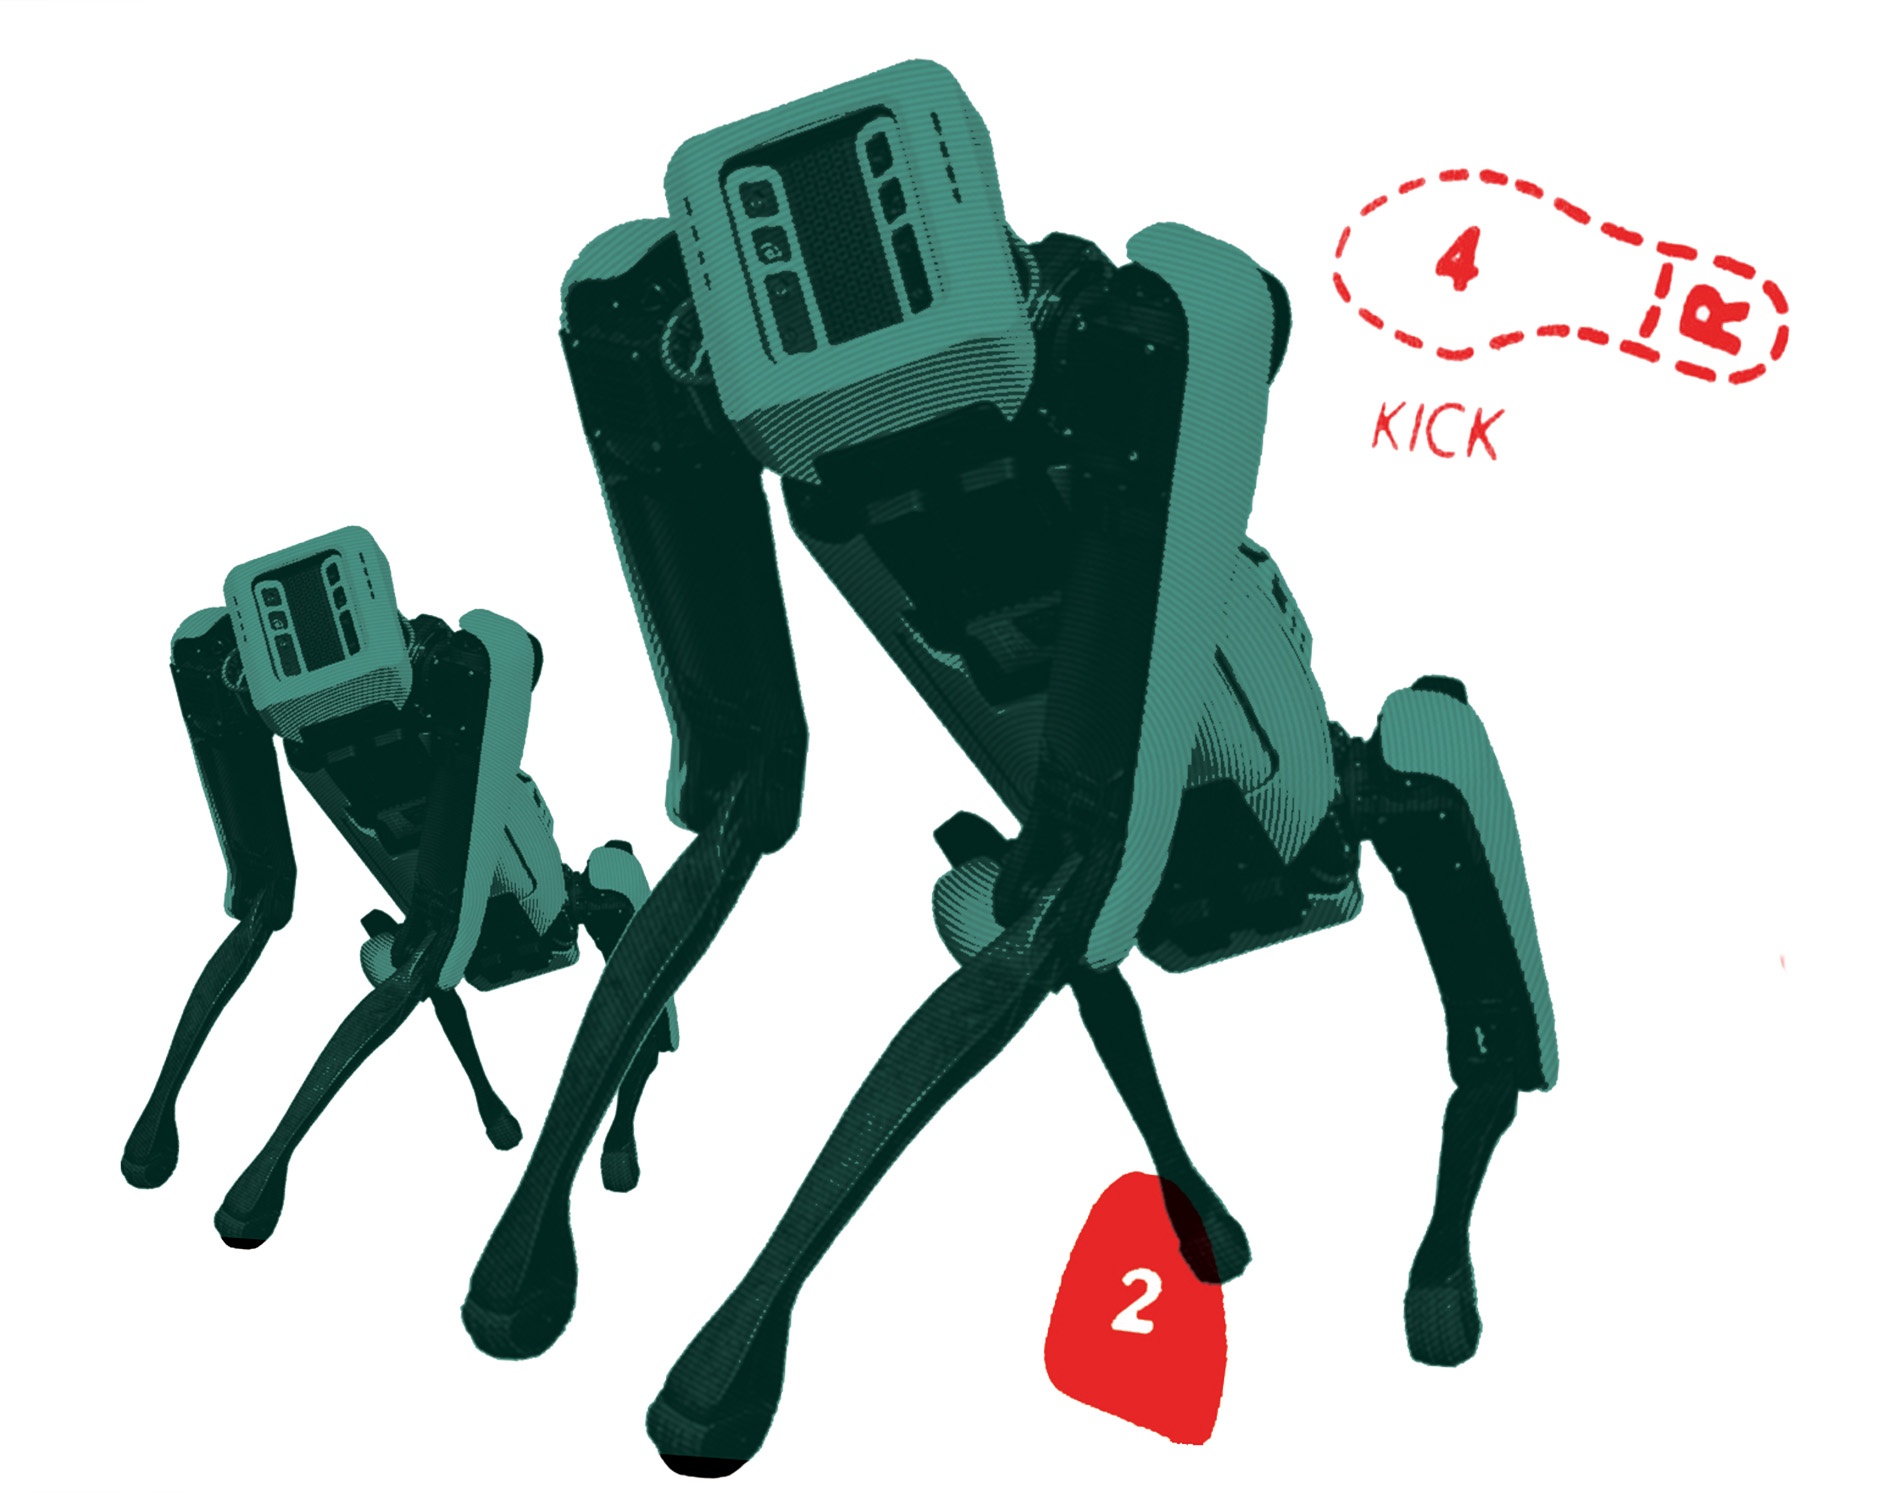 Illustration by Andy Martin of a green robot on a white background with red dance steps highlighted.